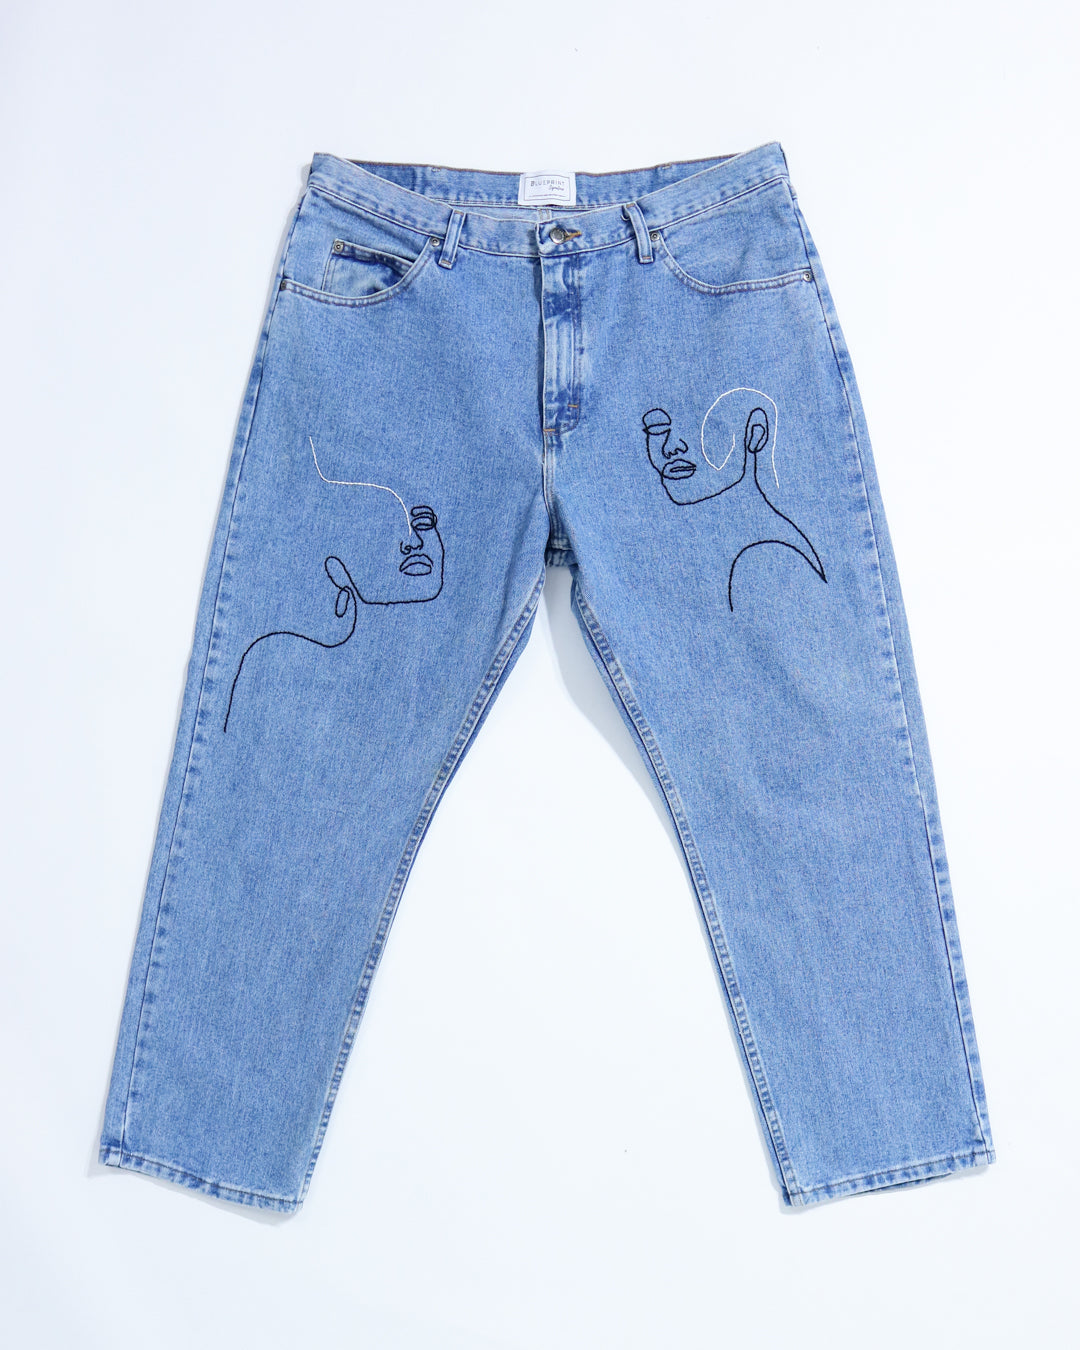 Embroidery Jeans (Size 18)